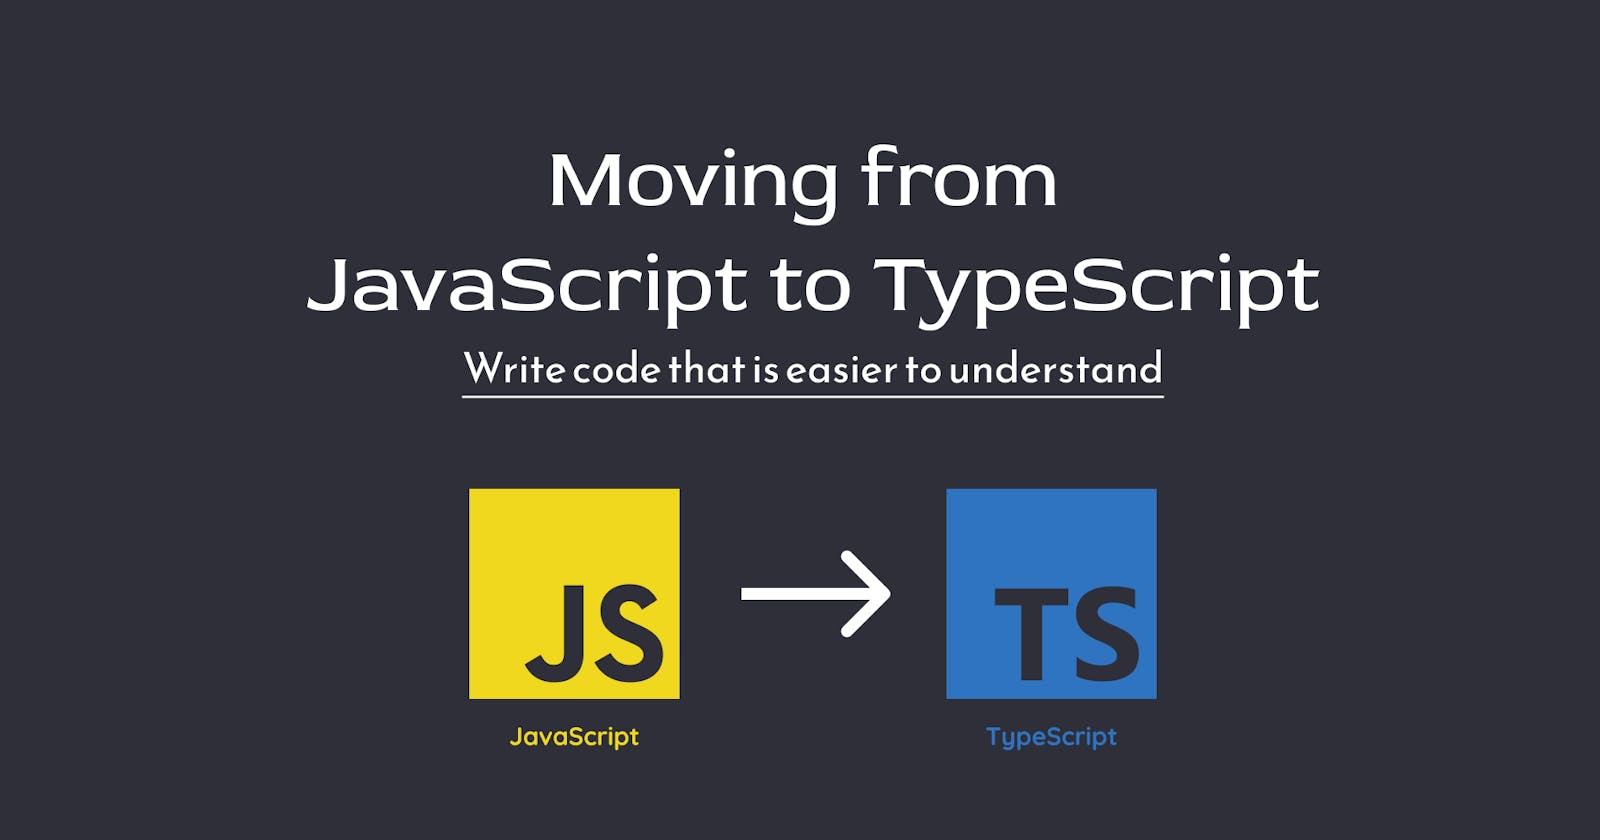 Moving from JavaScript to TypeScript